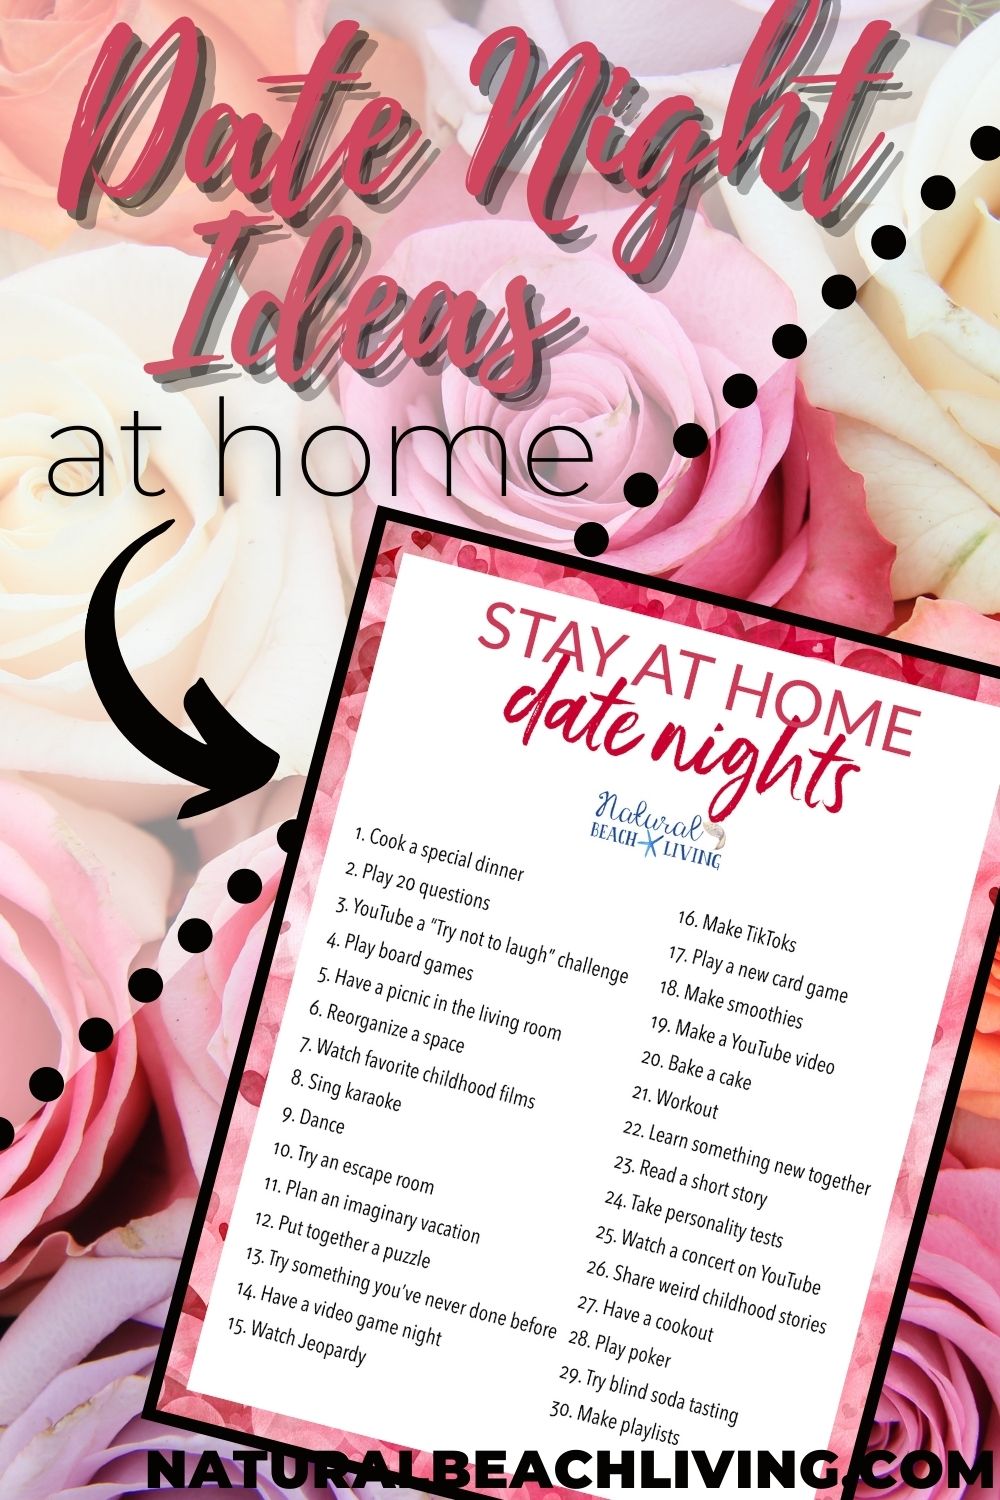 These Date Night Ideas at Home will give you so many fun things to do. You'll get over 30 fun date ideas to do in your home or outside. 1. Make a special dinner 2. play a fun game 3. give each other massages 4. have a picnic. Try something new with these Creative Date Night Ideas 